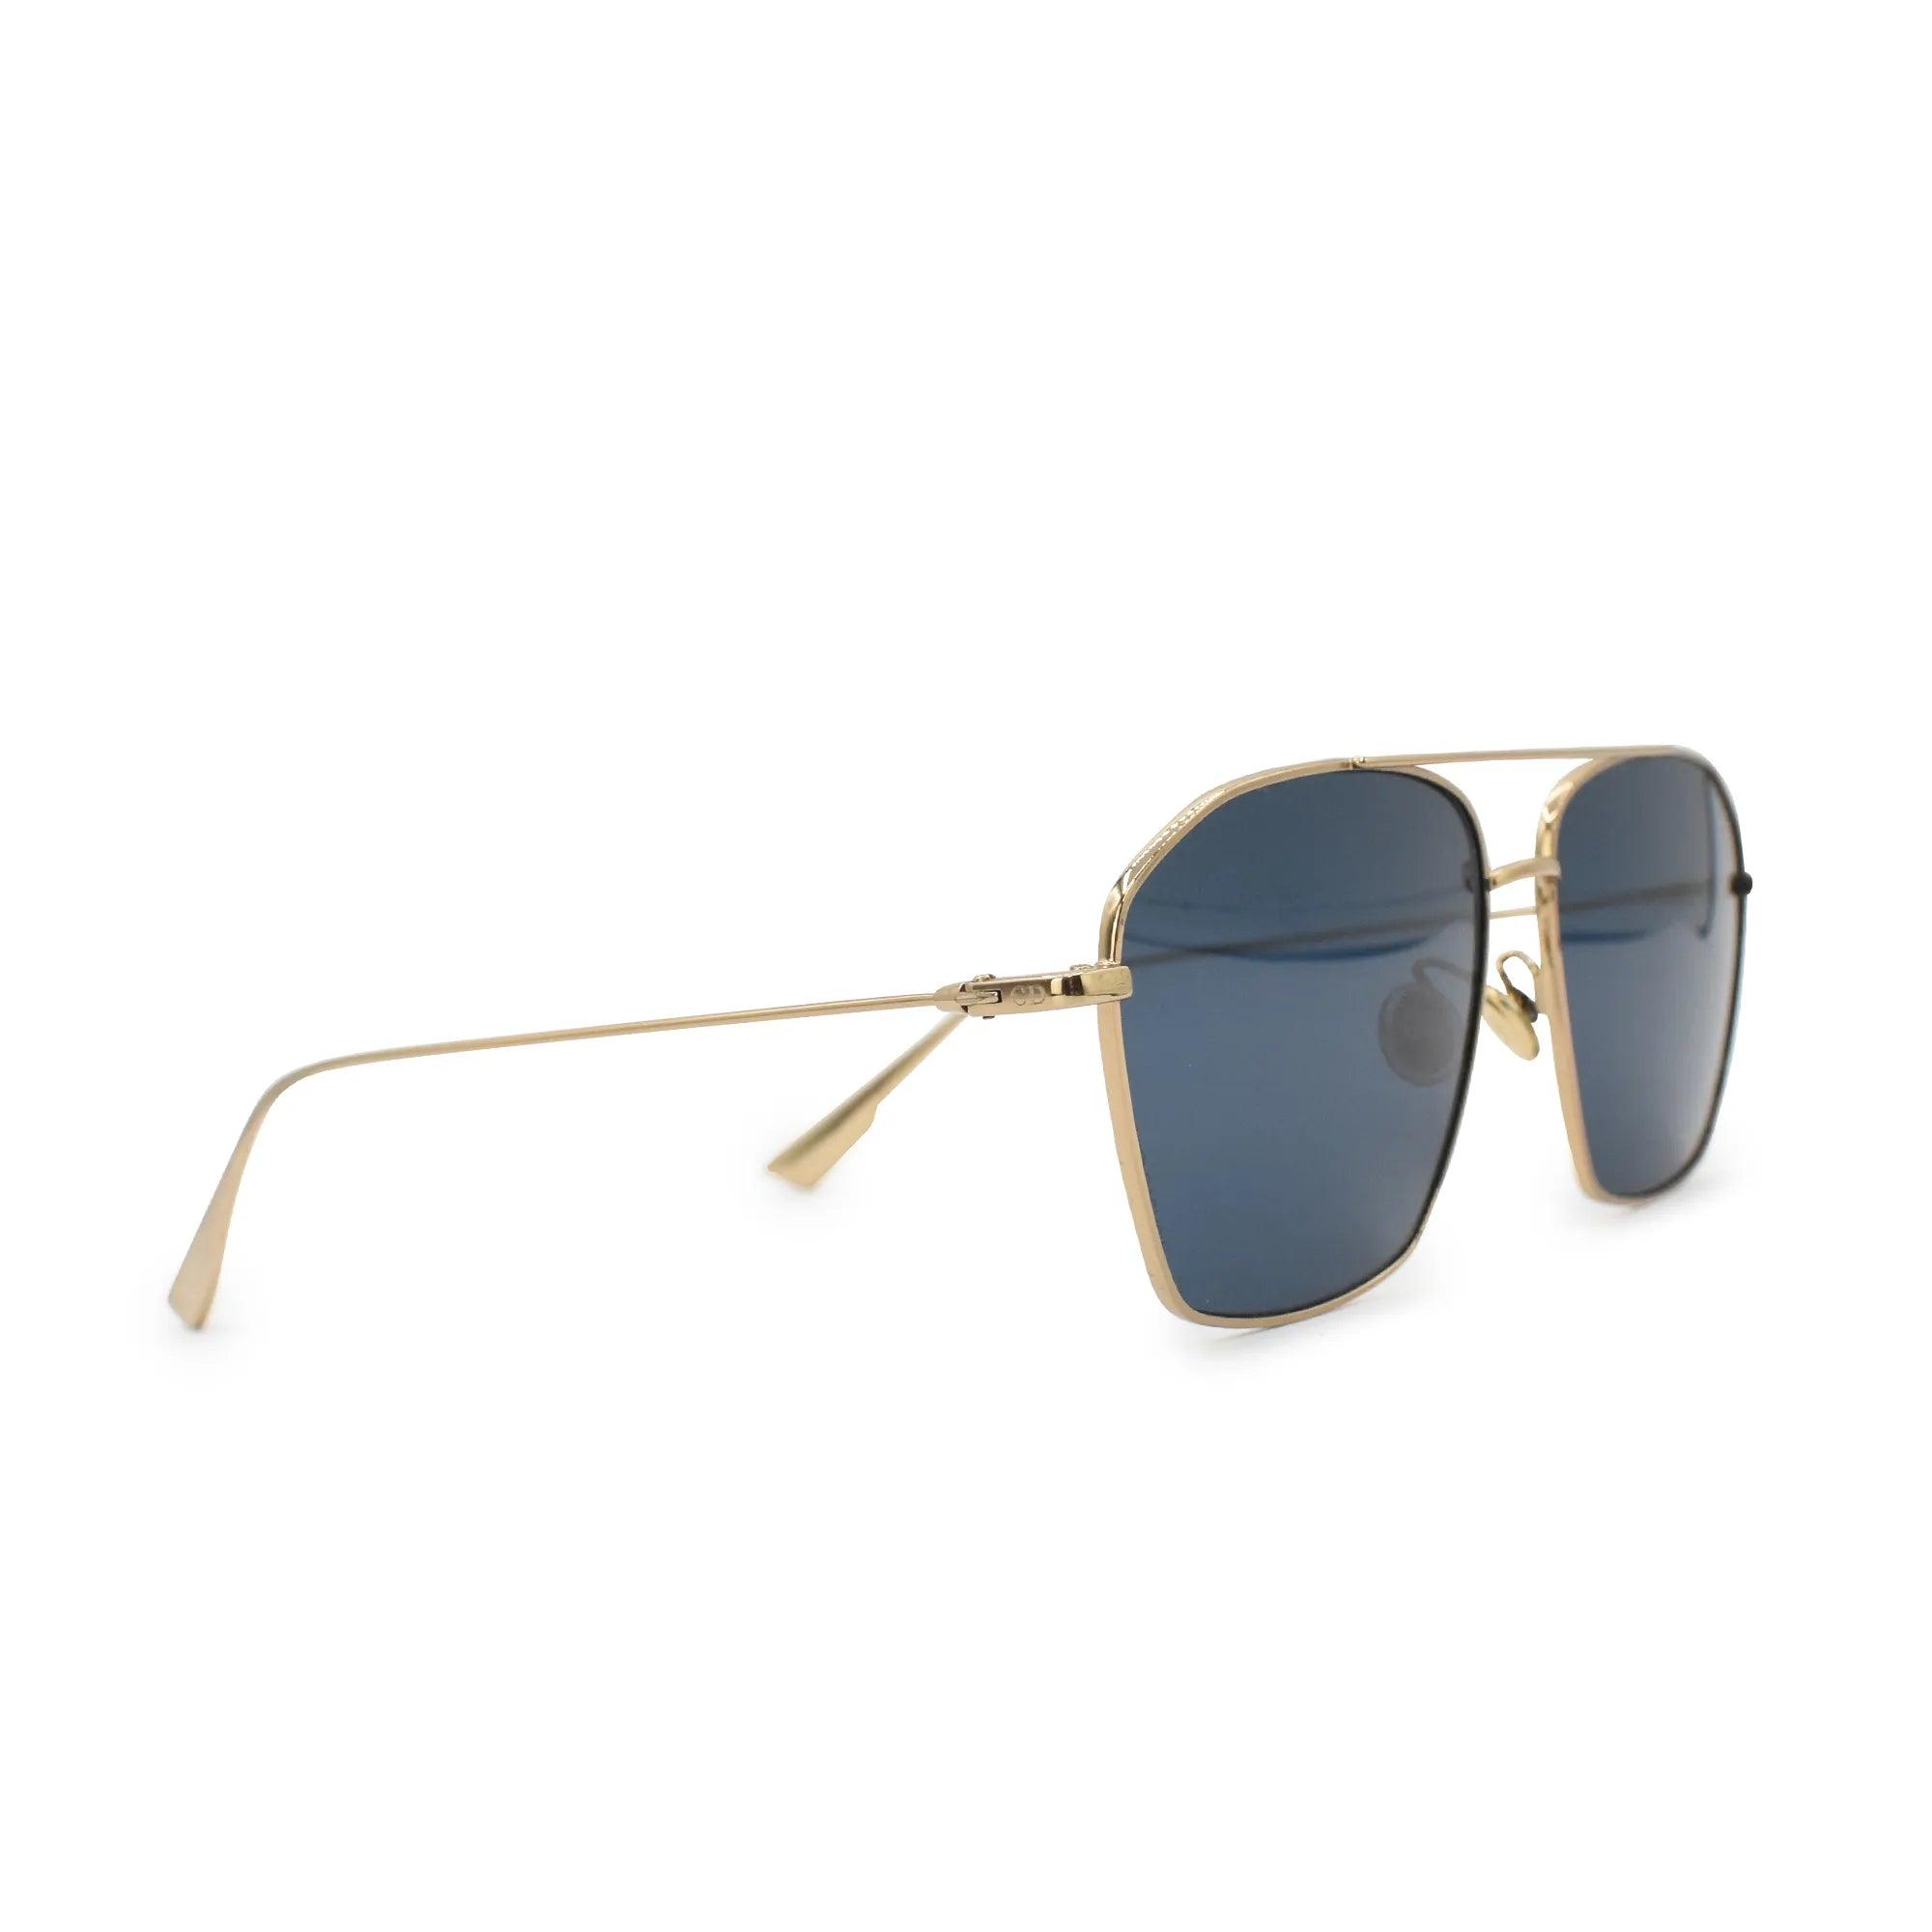 Dior 'Stellaire' Sunglasses - Fashionably Yours